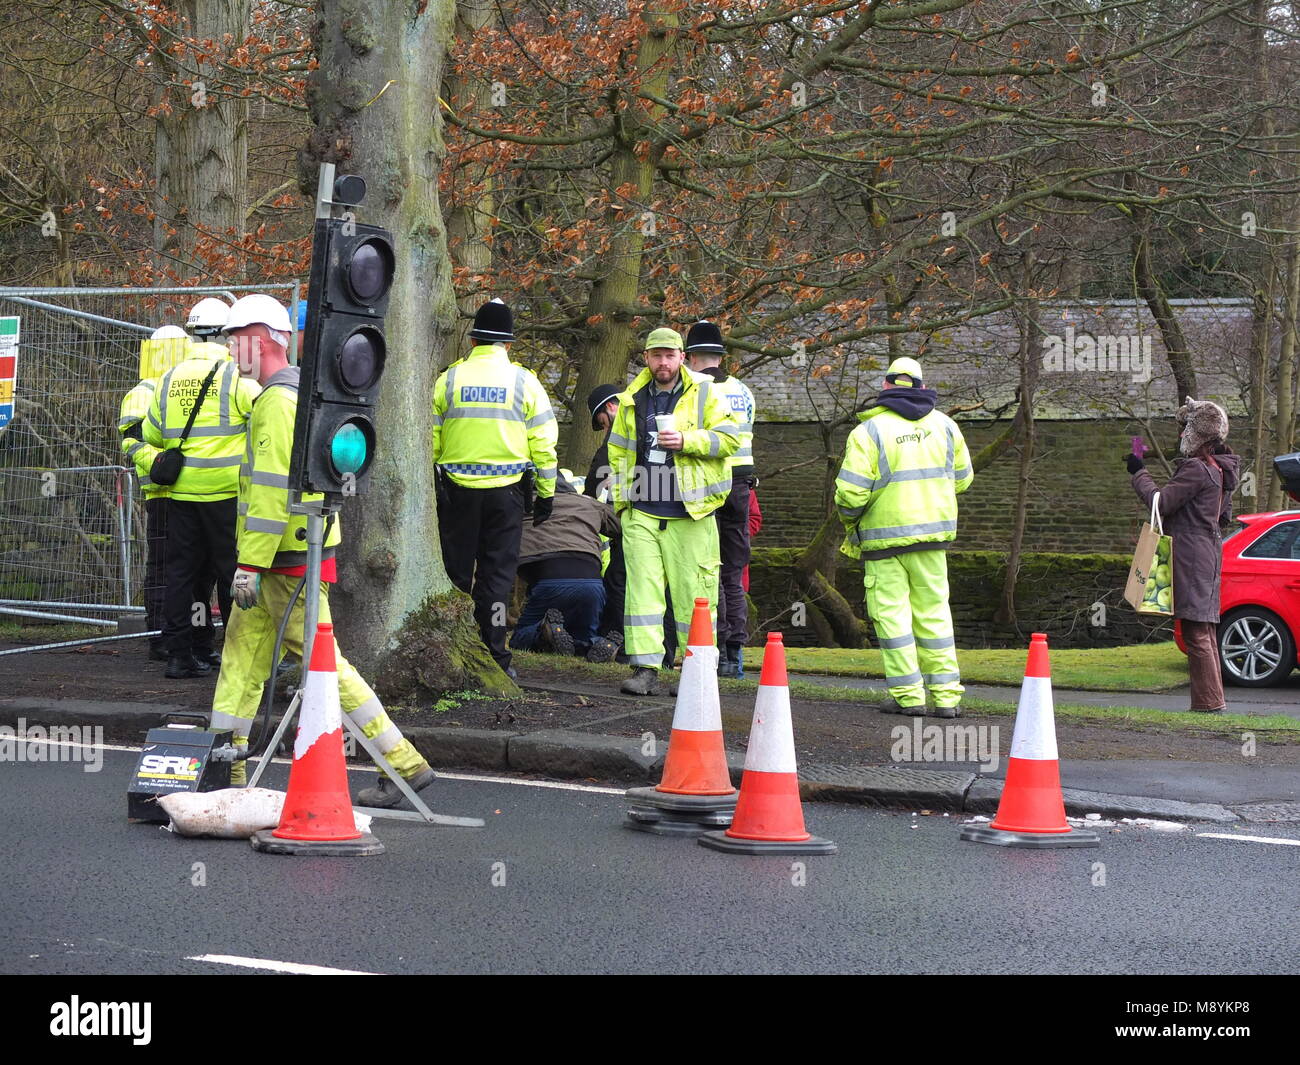 Sheffield controversial tree fellings. Elderly male protester forcibly removed from a tree felling site on Rivelin Valley Road by police. Stock Photo